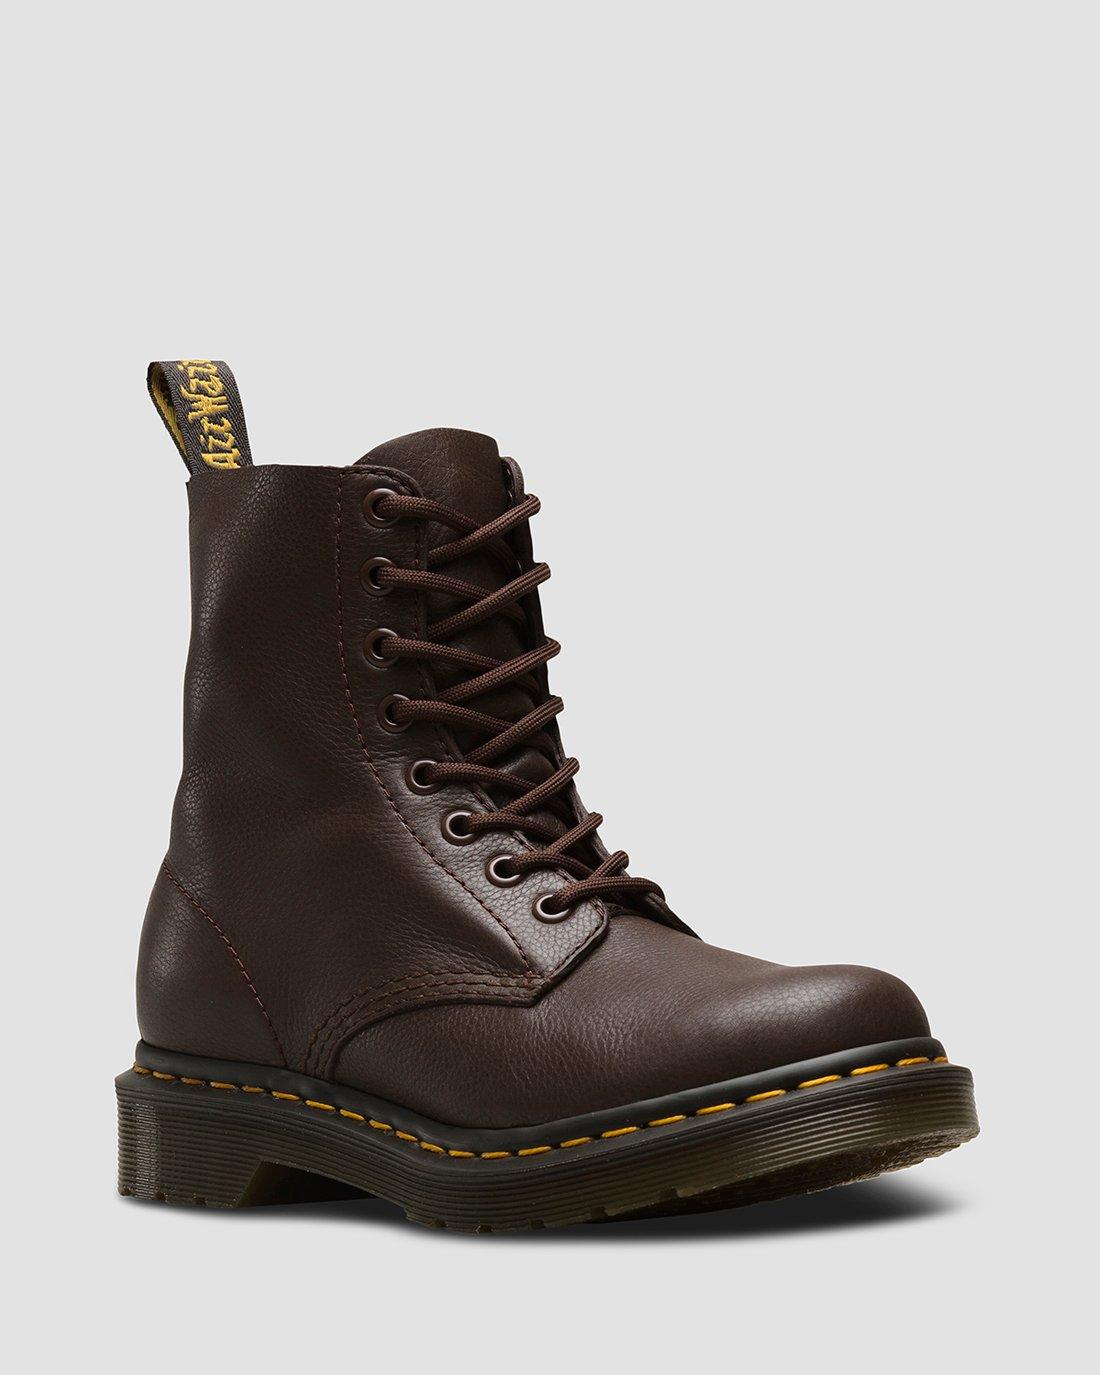 1460 Pascal Virginia Leather Boots in Dark Brown | Dr. Martens